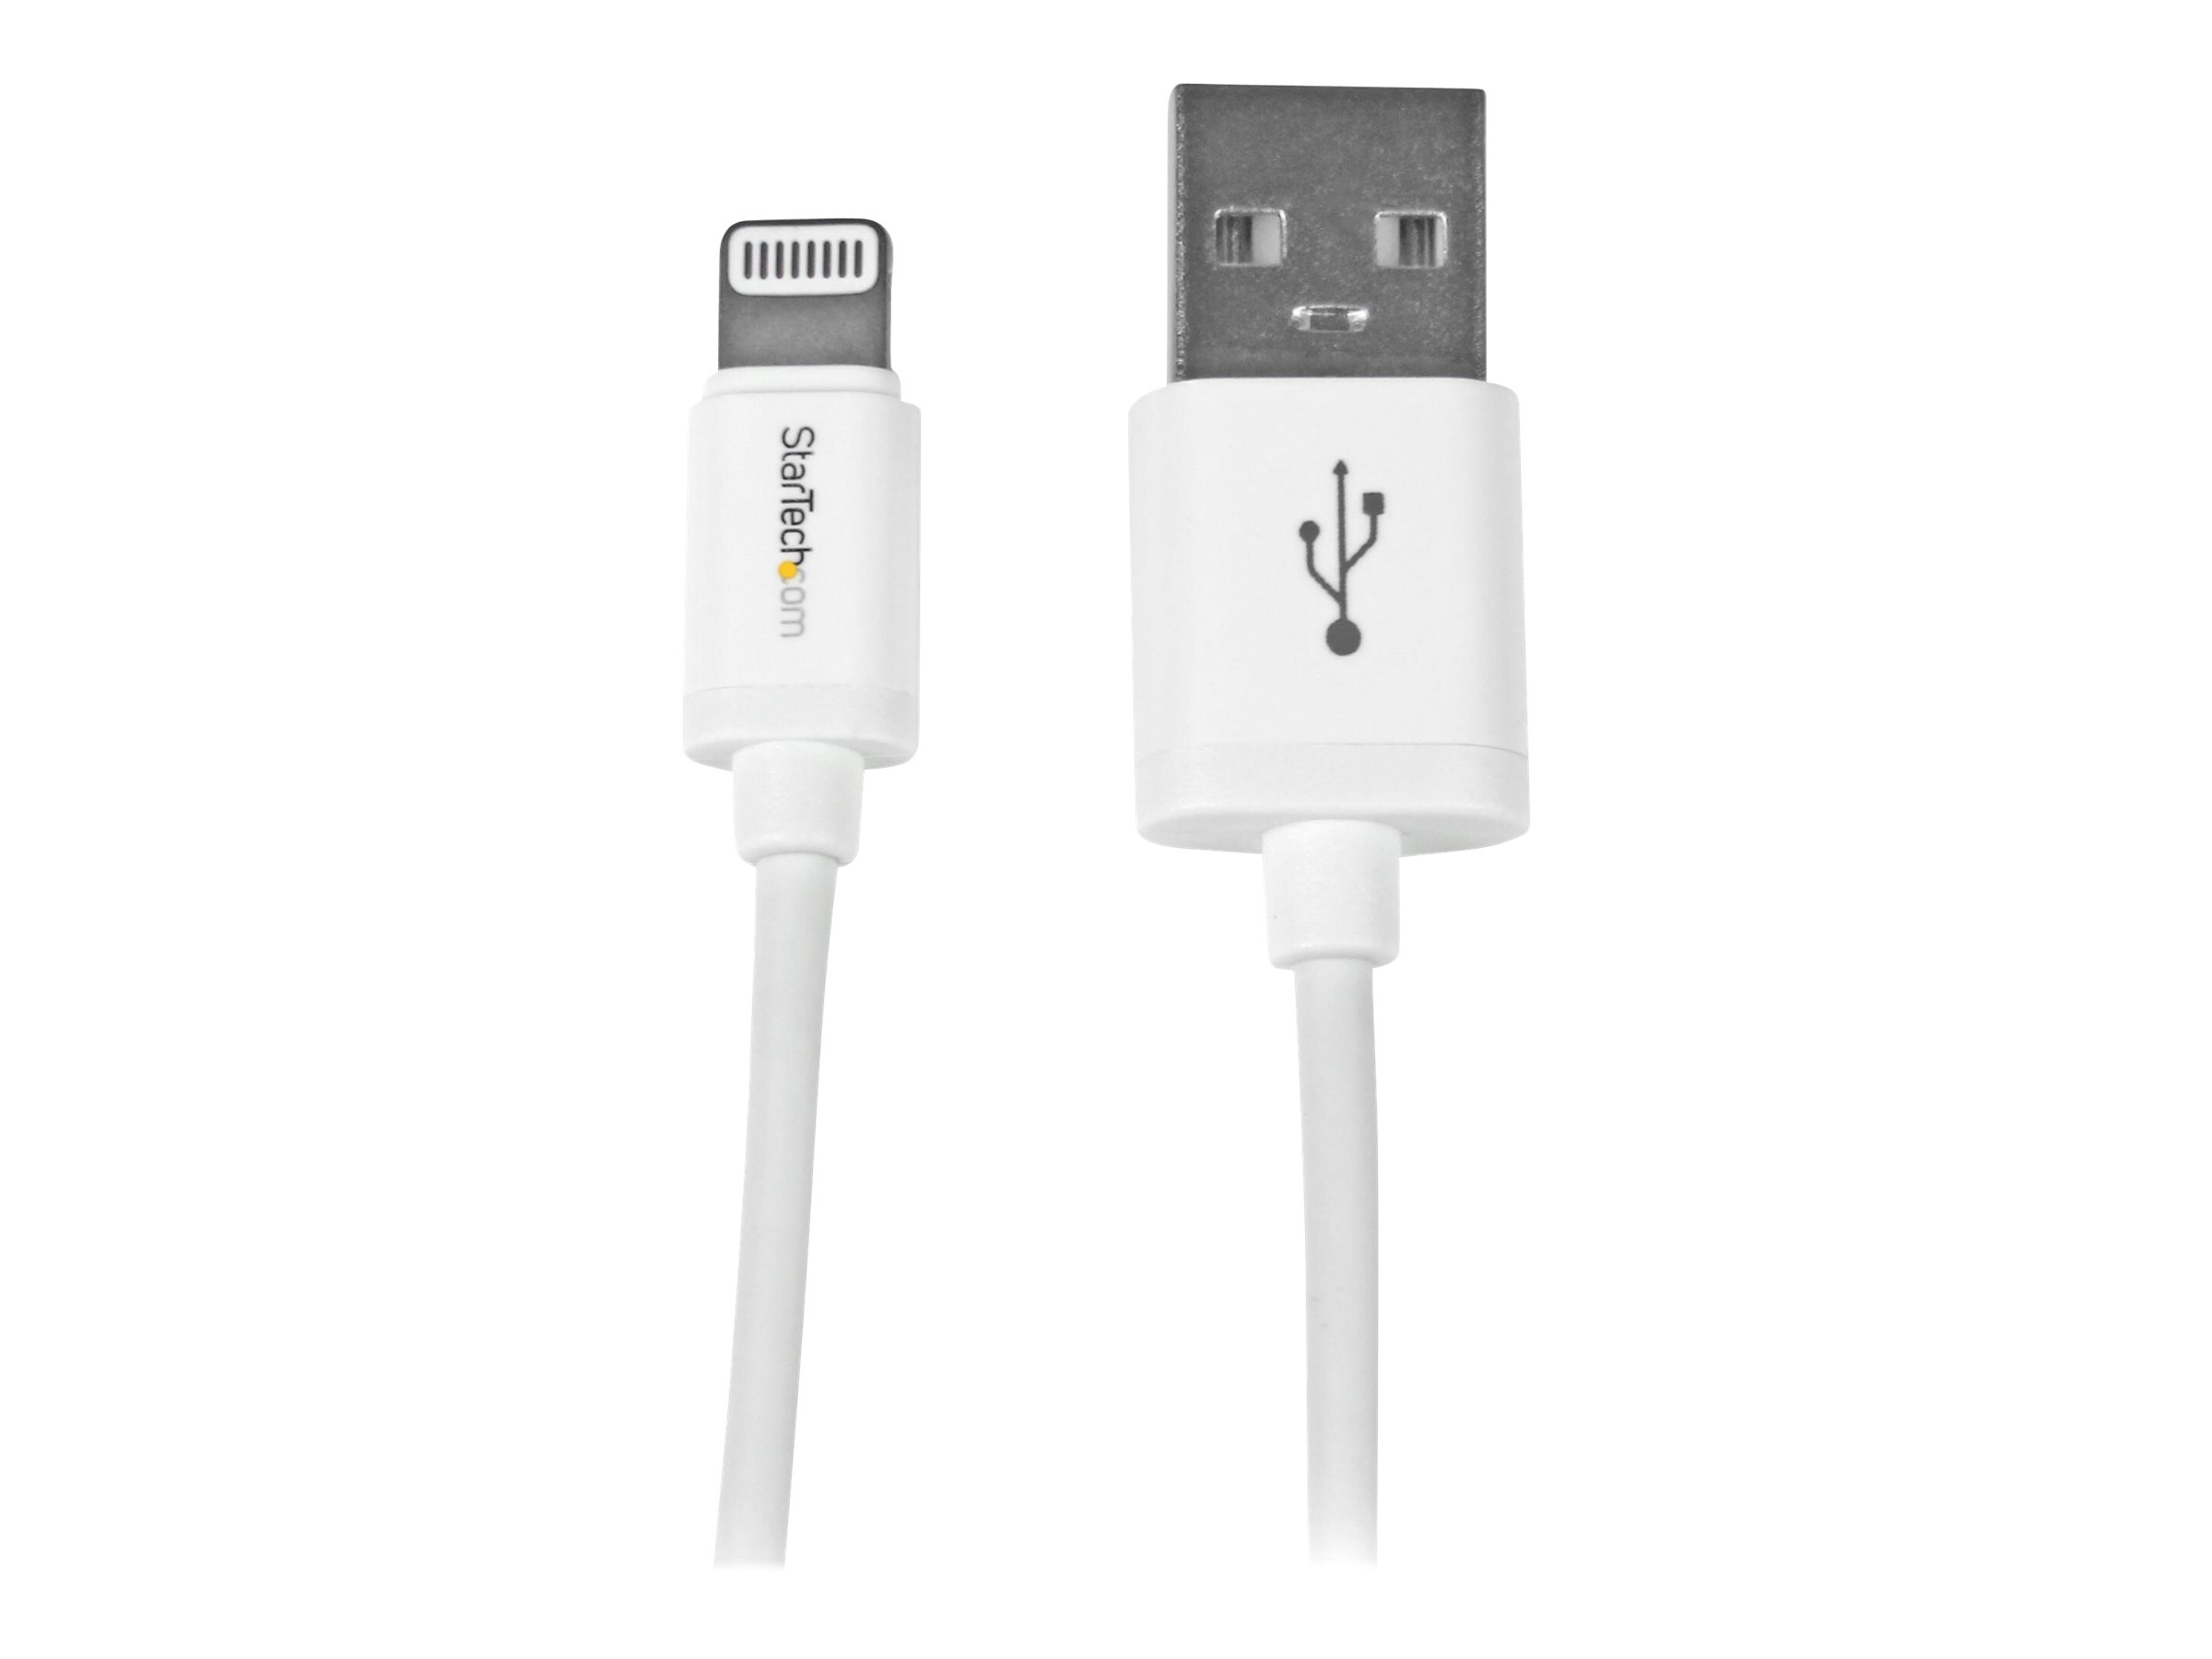 Short Micro-USB Cable - M/M - 15cm (6in)